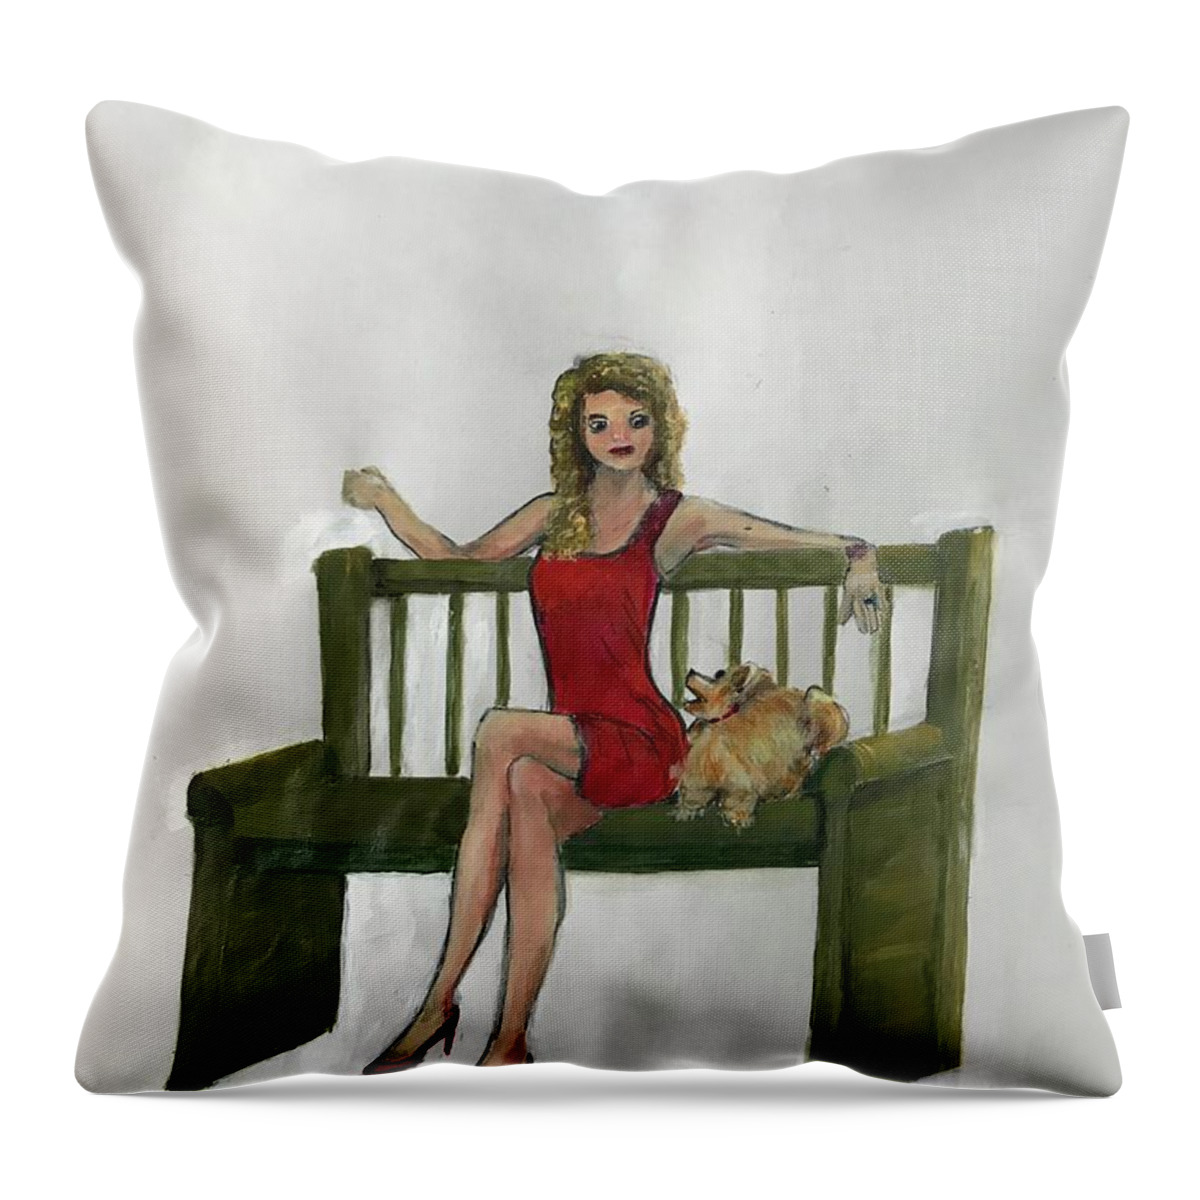 Sitting On Bench Throw Pillow featuring the painting Captivating Lady 1 by Deborah Naves